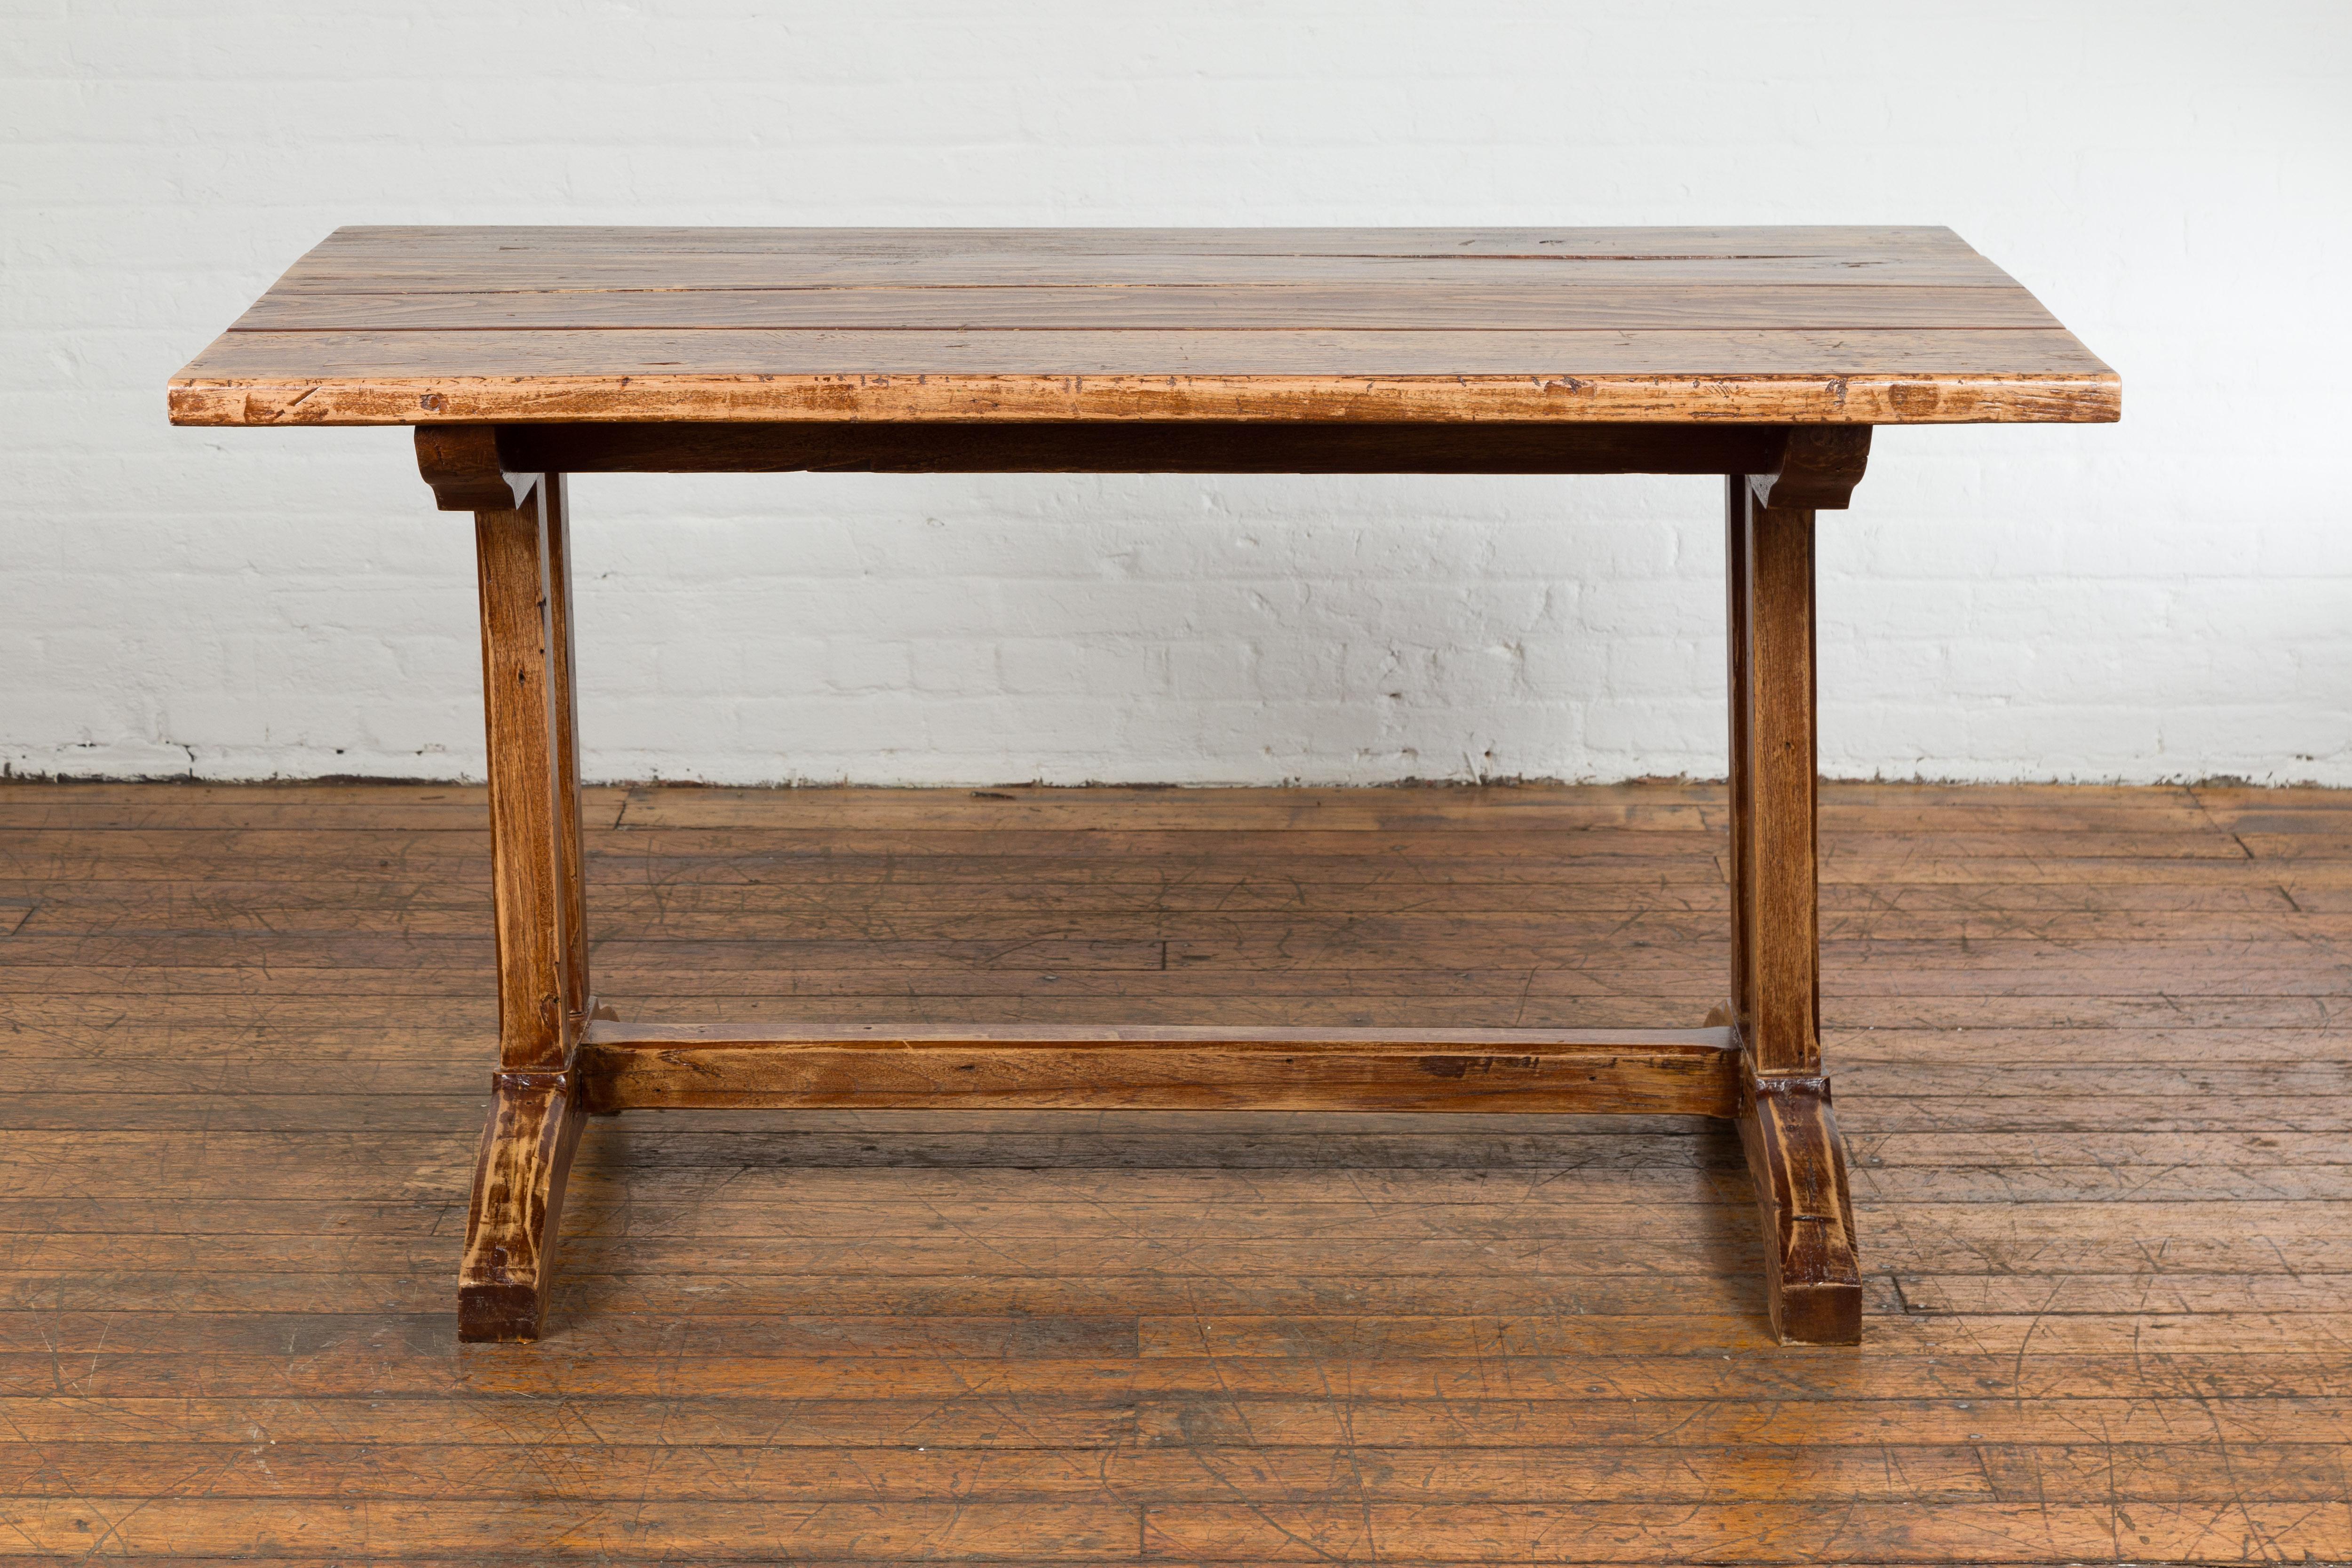 Indonesian 19th Century Country Farmhouse Table with Trestle Base and Distressed Finish For Sale